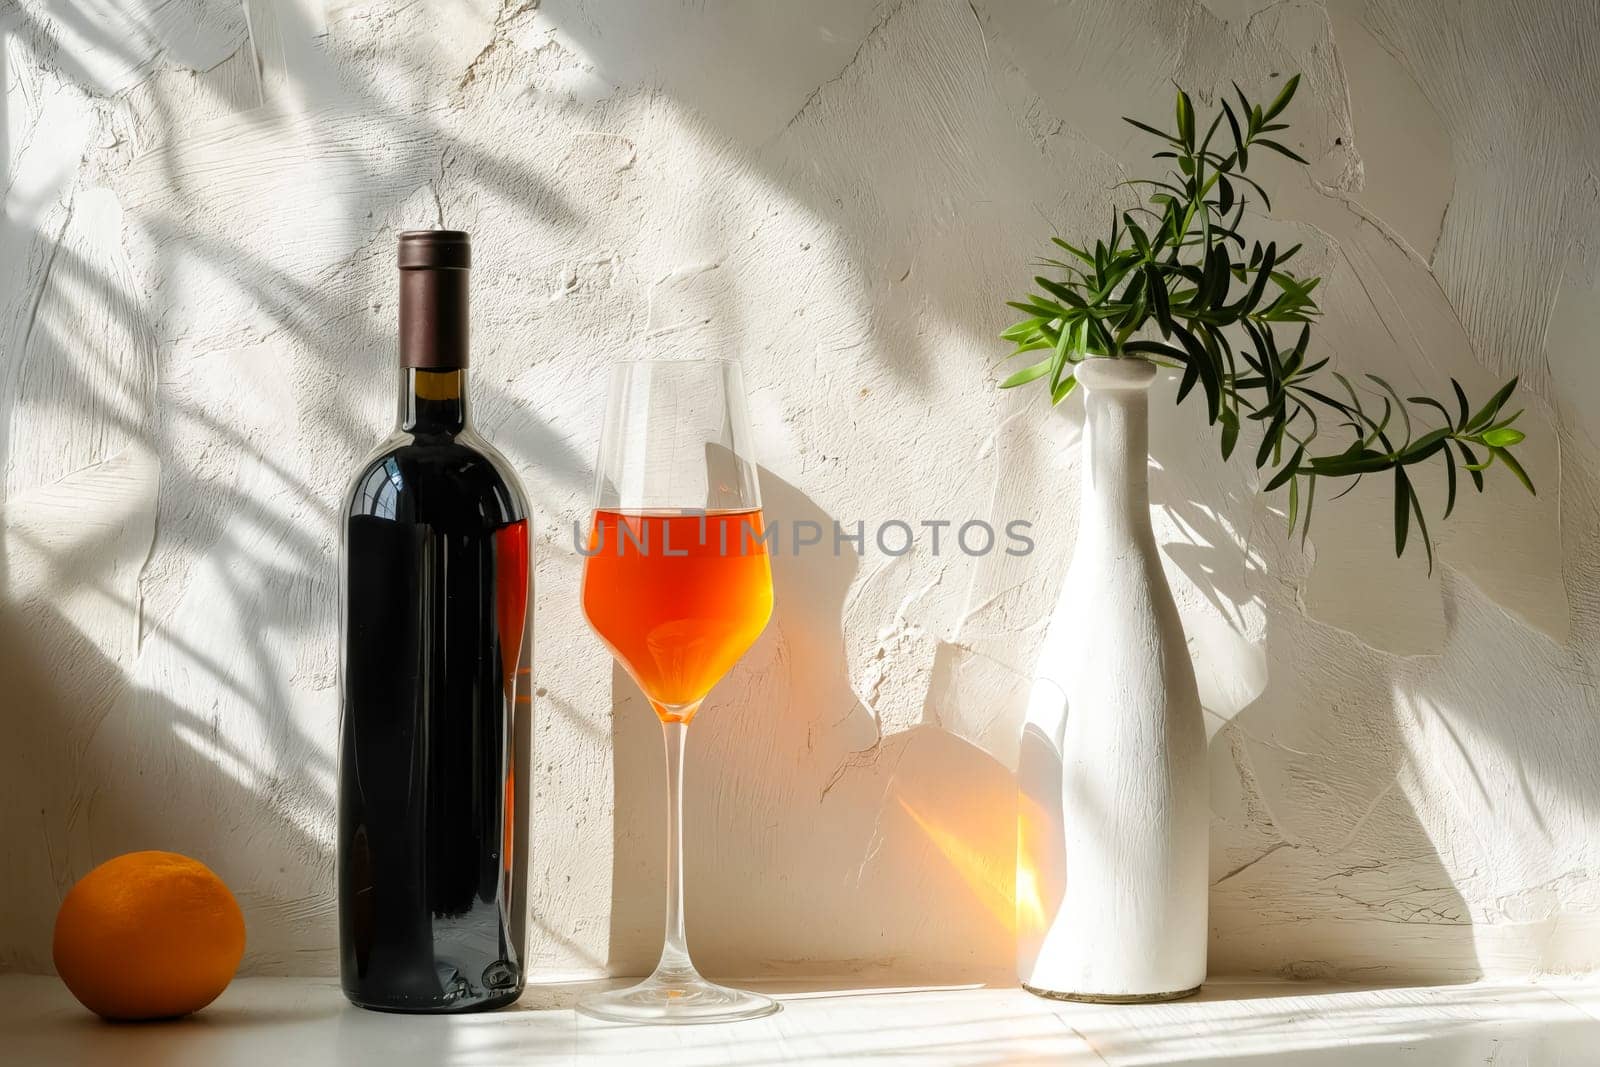 A bottle of wine and a wine glass are on a table next to a vase with a plant in it. The scene is set in a sunny room, with the sunlight shining on the table and the vase. Generative AI